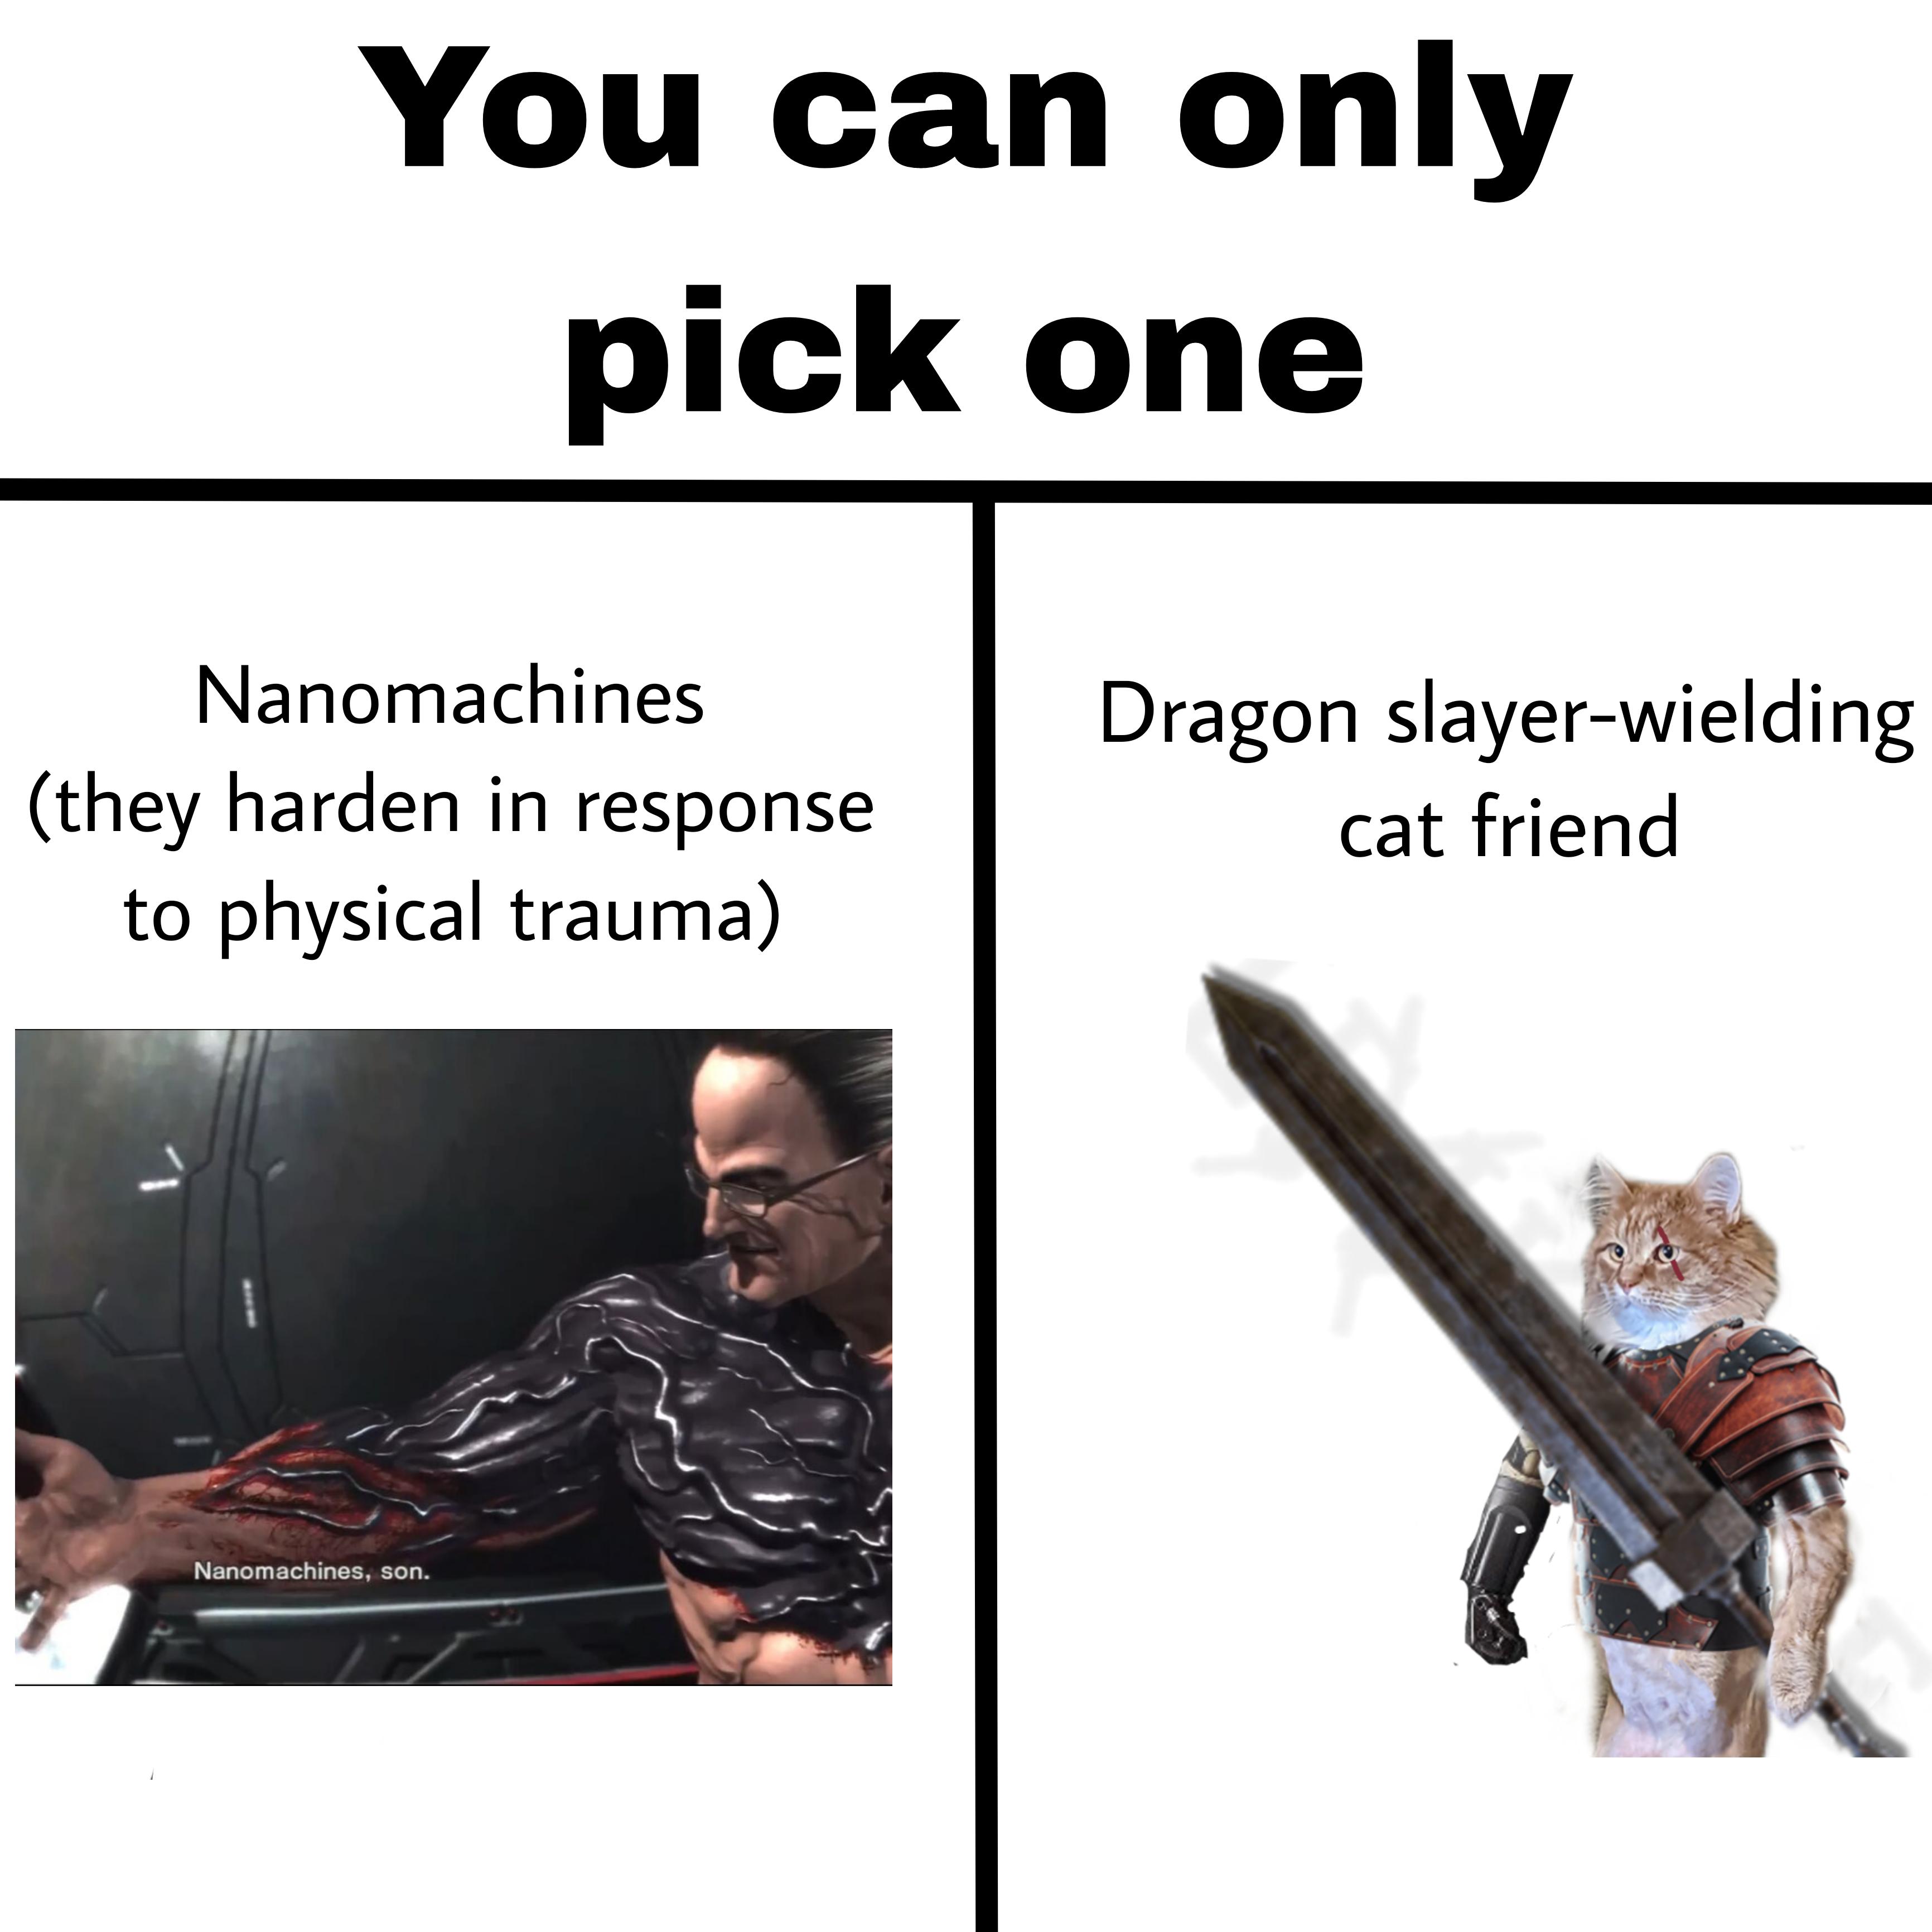 funny memes and pics - shoe - You can only pick one Nanomachines they harden in response to physical trauma Nanomachines, son Dragon slayerwielding cat friend